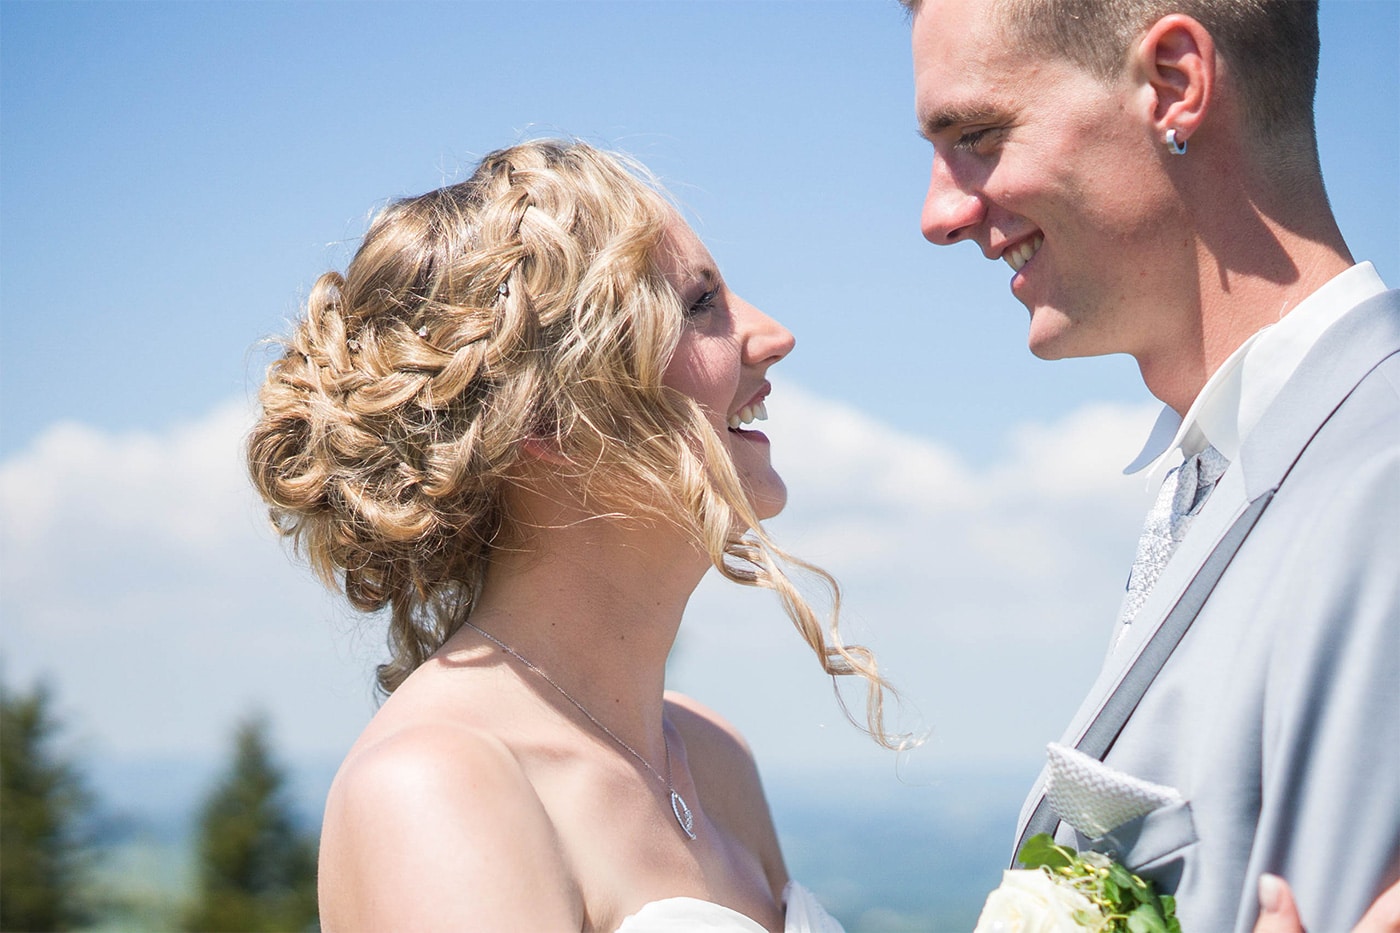 Steph Wenker, photographe – Mariages, couples, familles, grossesses – Neuchâtel, Suisse